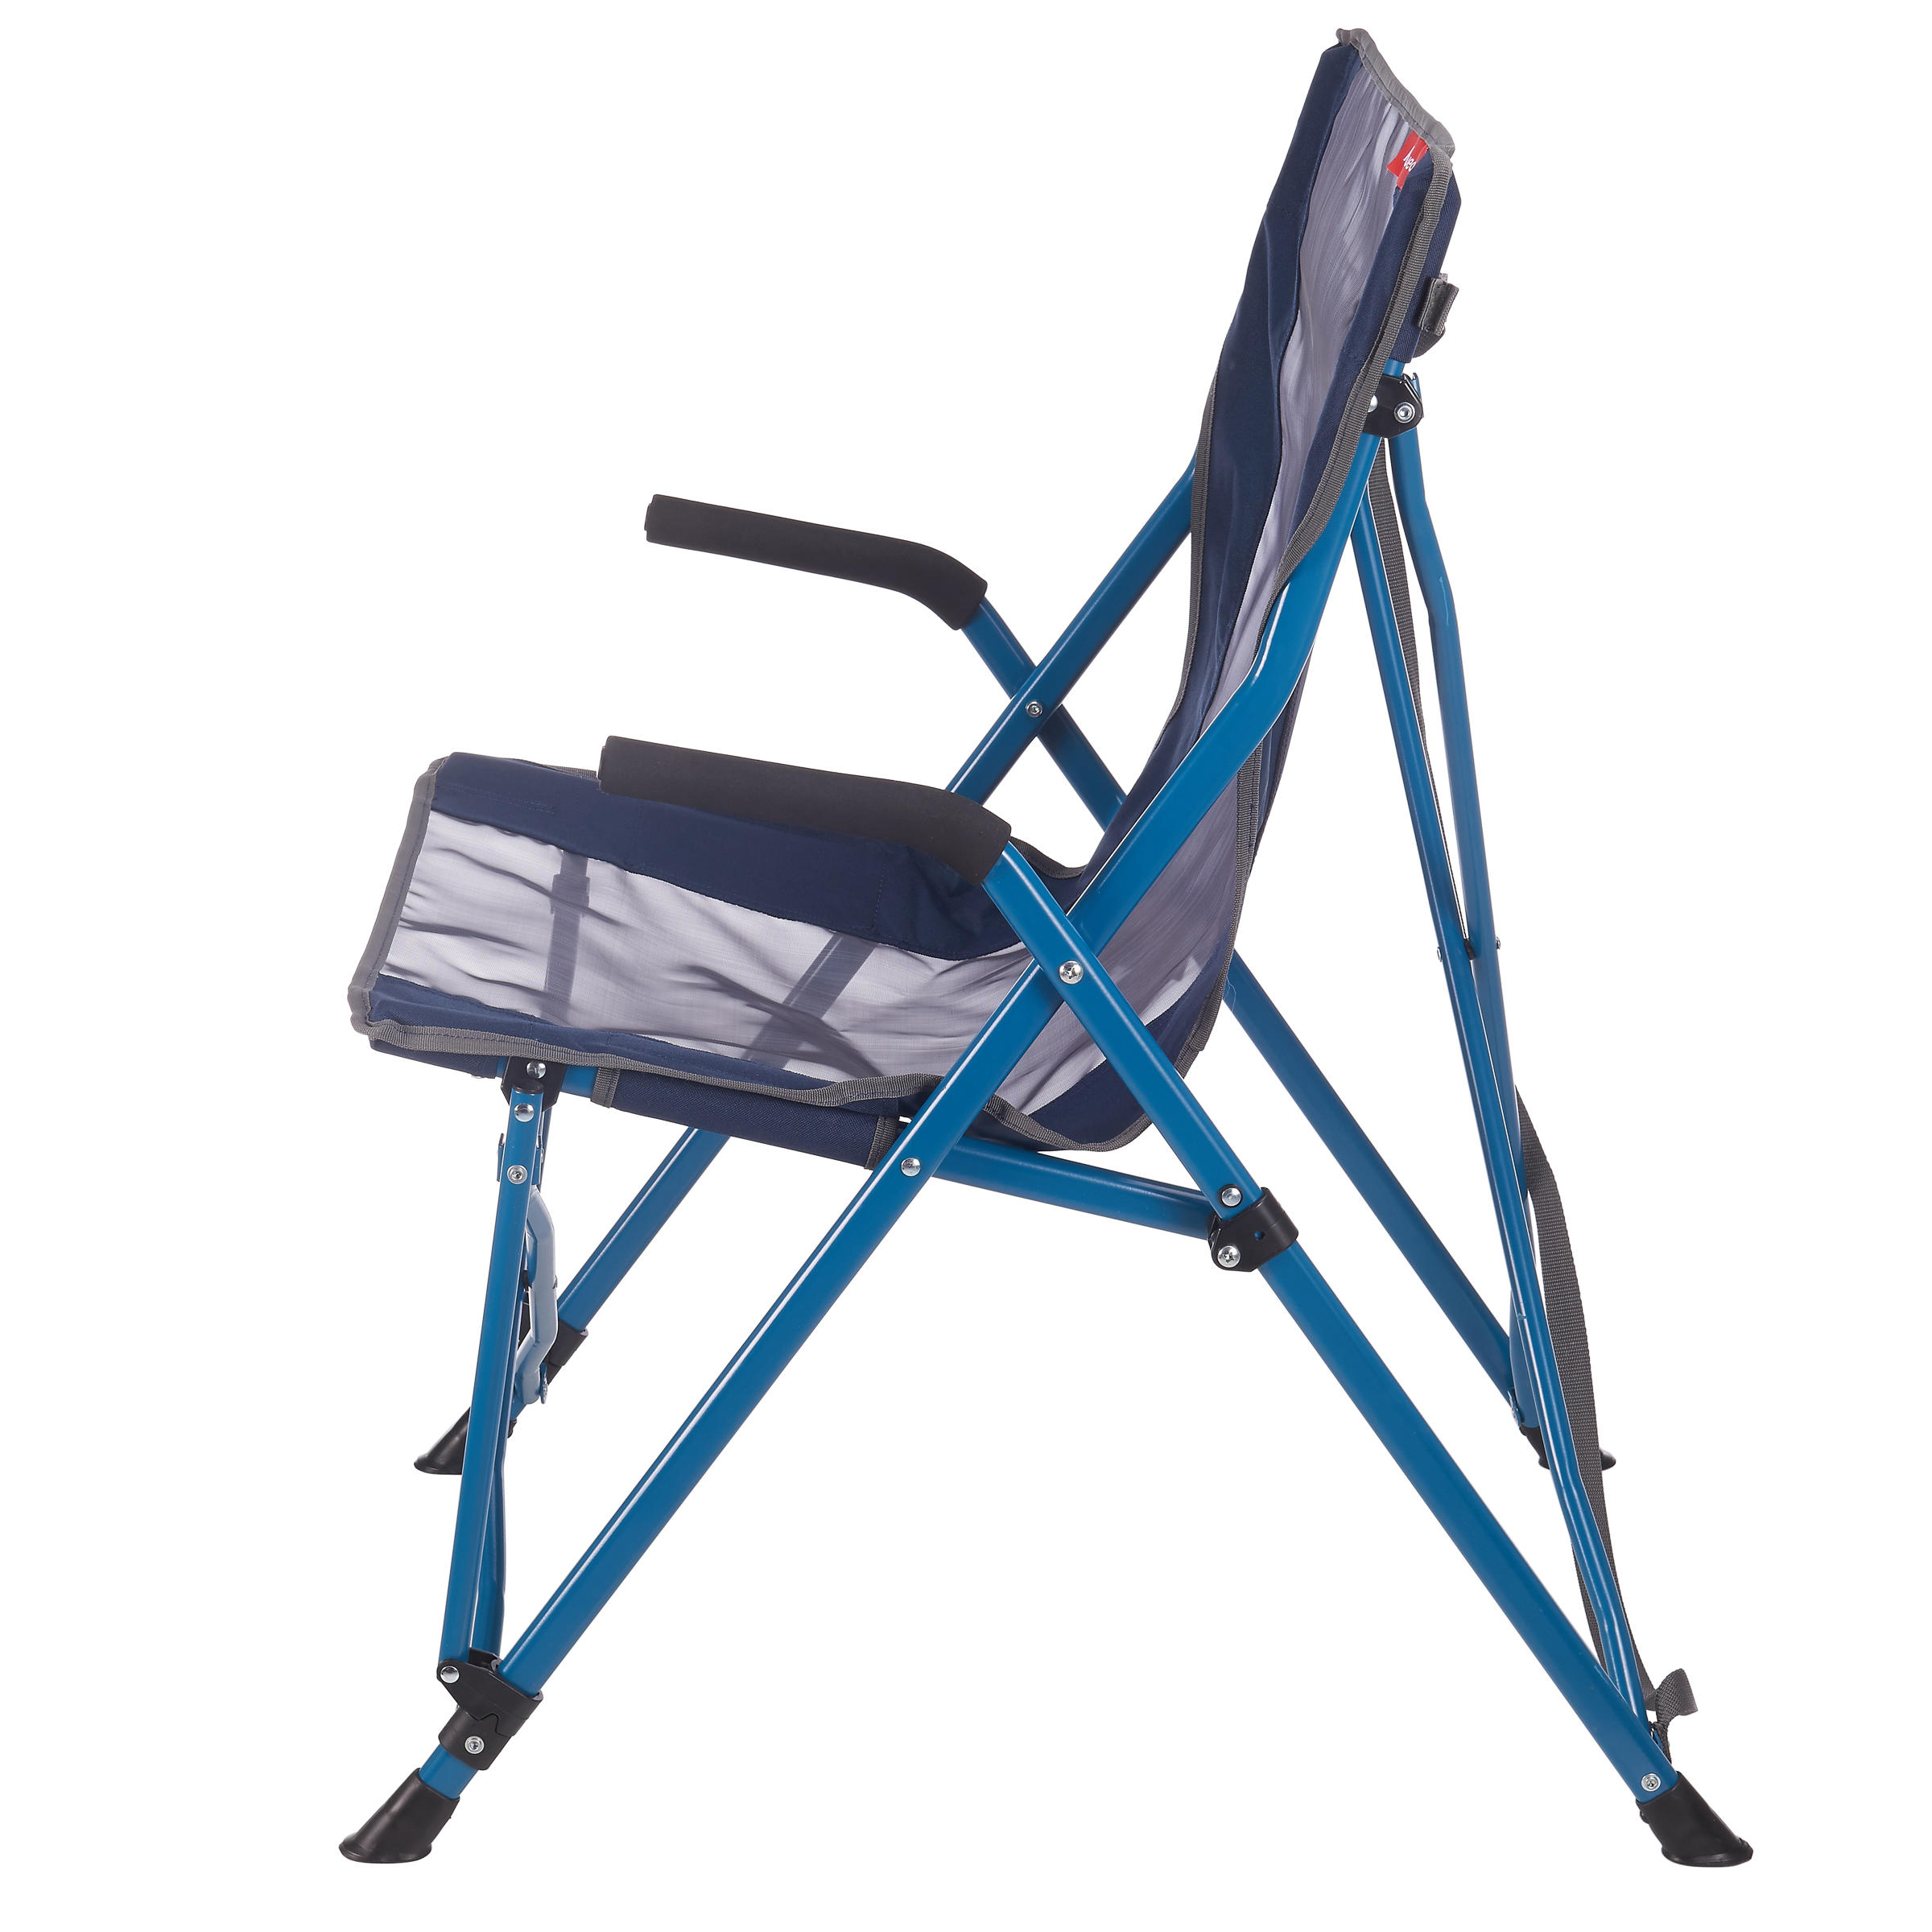 COMFORT CHAIR FOR CAMPING - BLUE 5/10